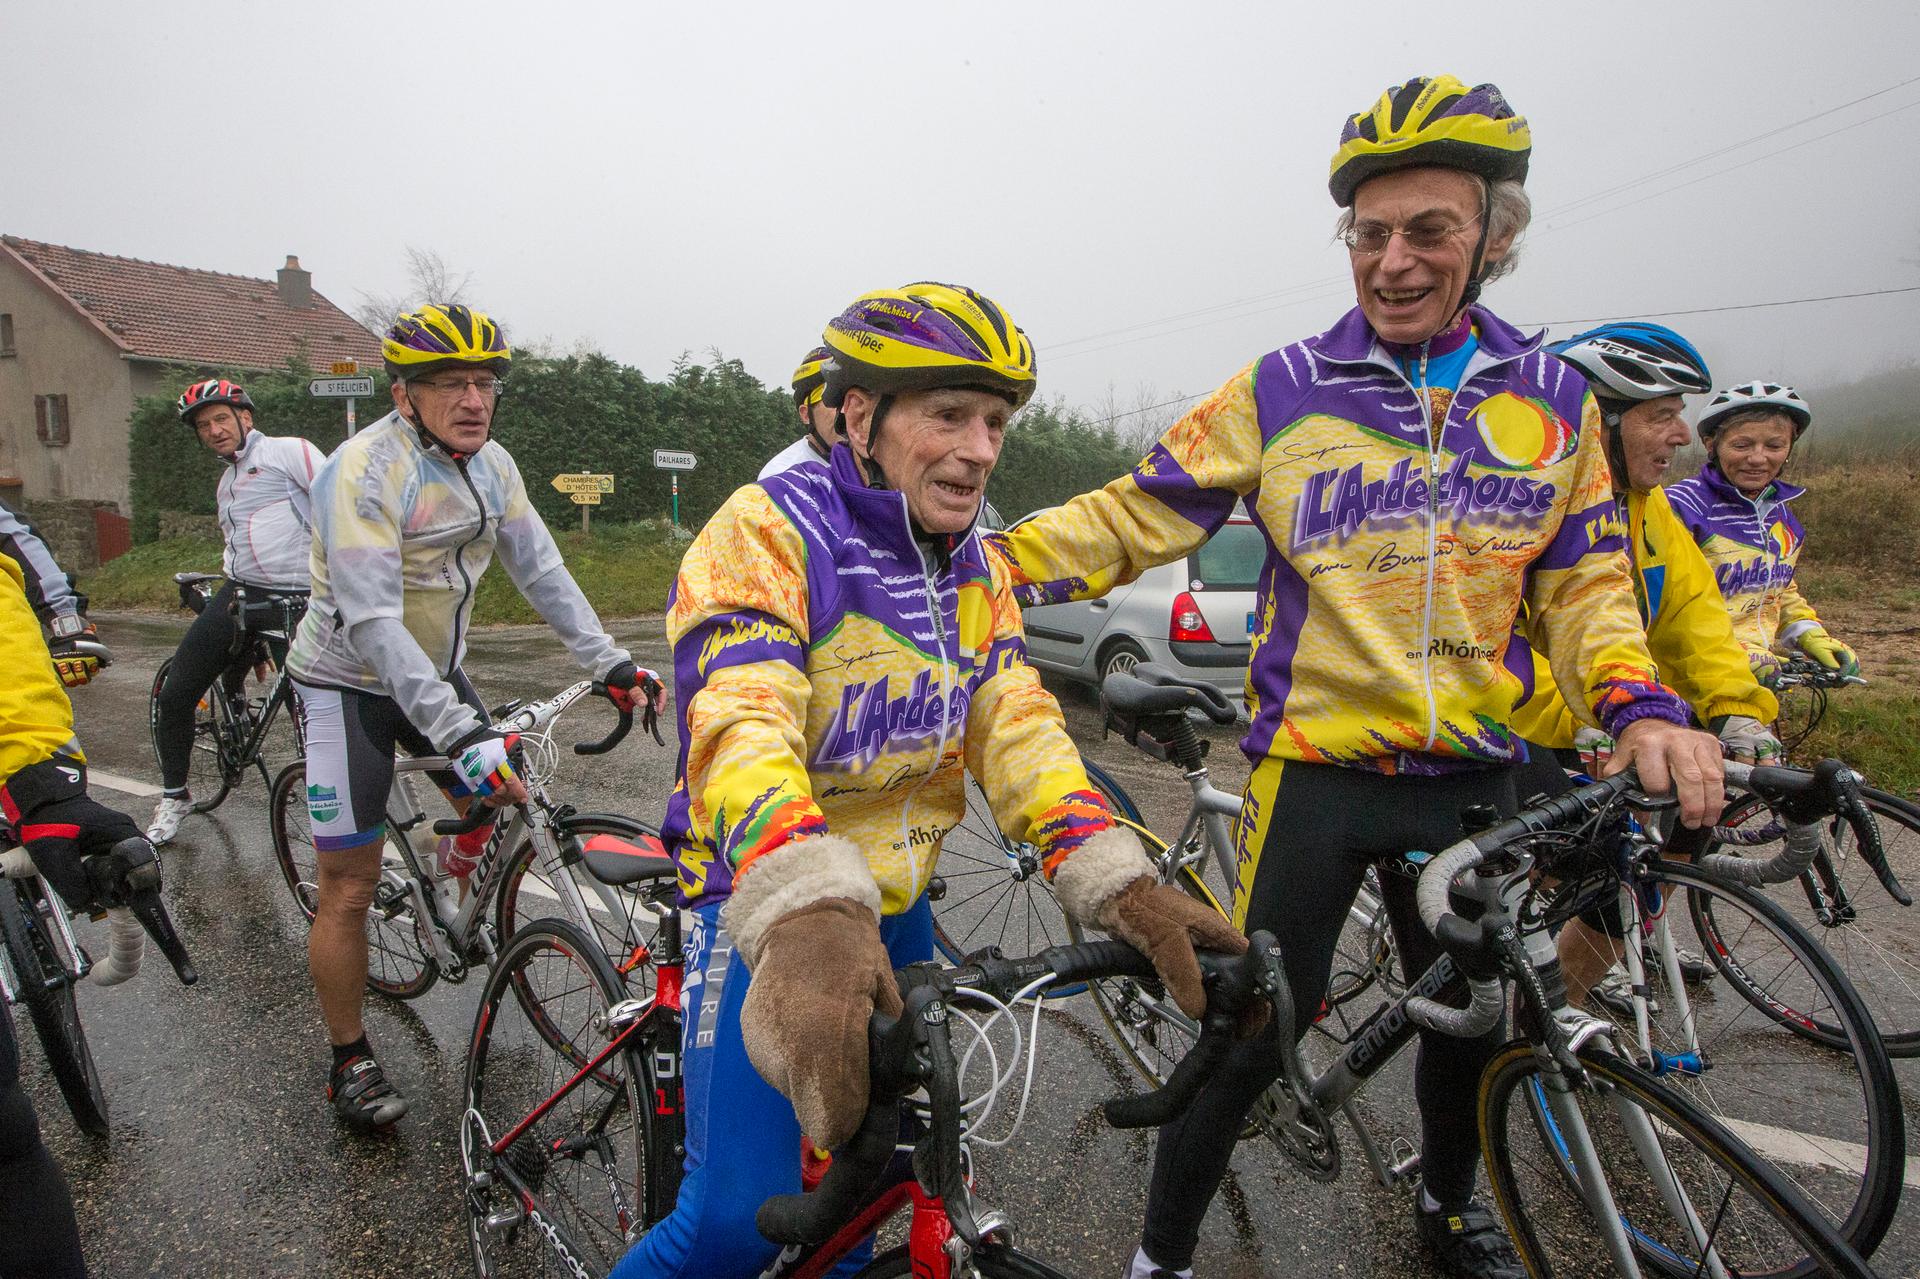 Robert Marchand (C), 103 years-old, speaks with riders as he makes his way along the Robert Marchand pass